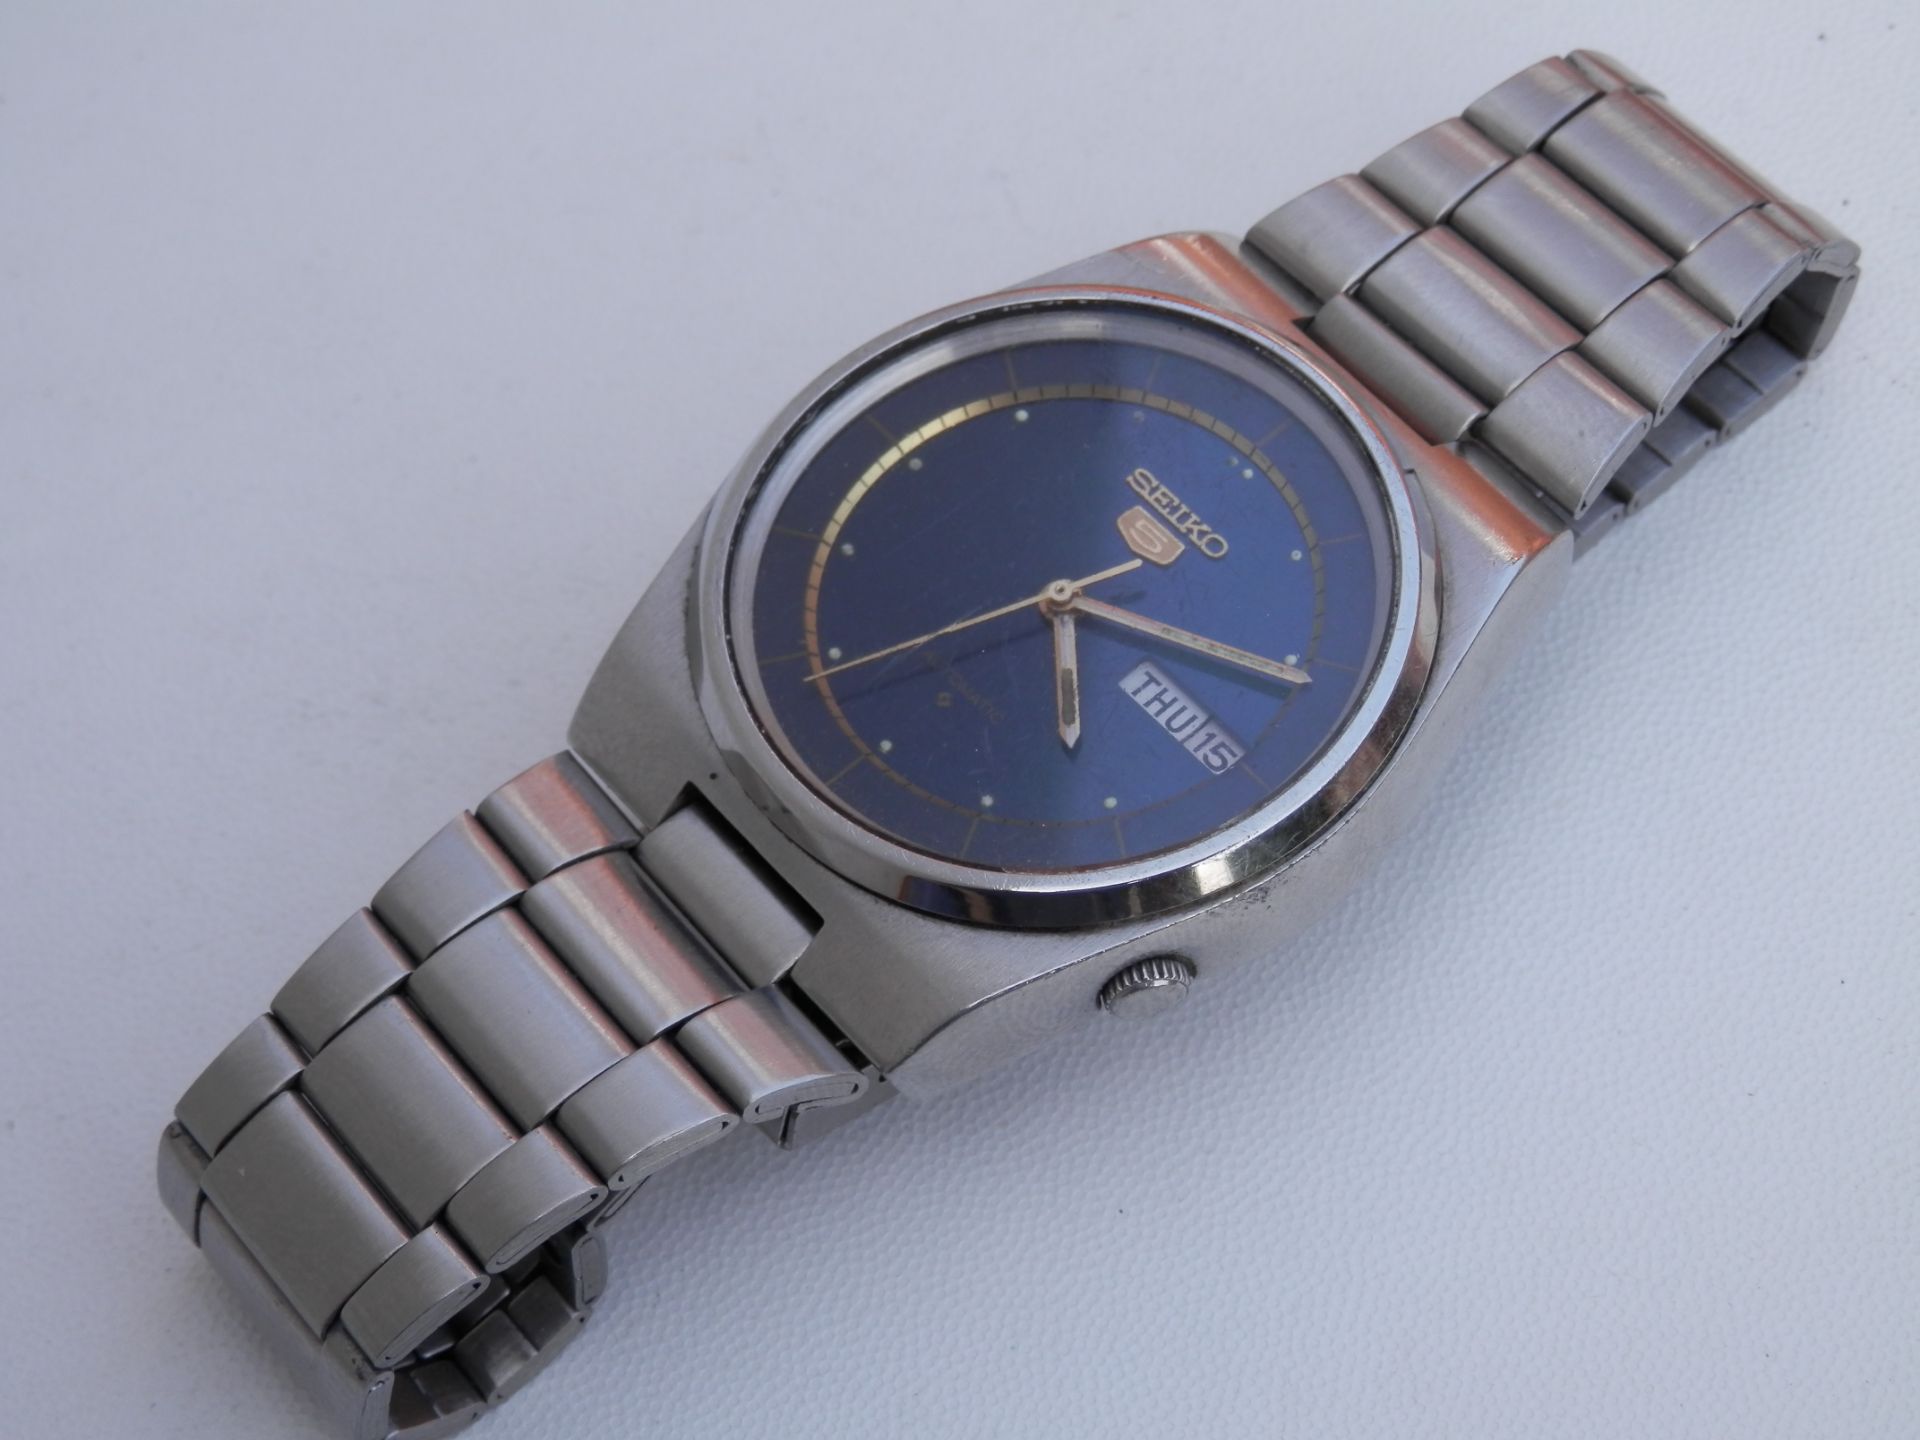 GENTS VINTAGE 1979 SEIKO 5 AUTOMATIC 17 JEWEL DAY/DATE MECHANICAL WATCH. METALLIC BLUE DIAL. - Image 4 of 11